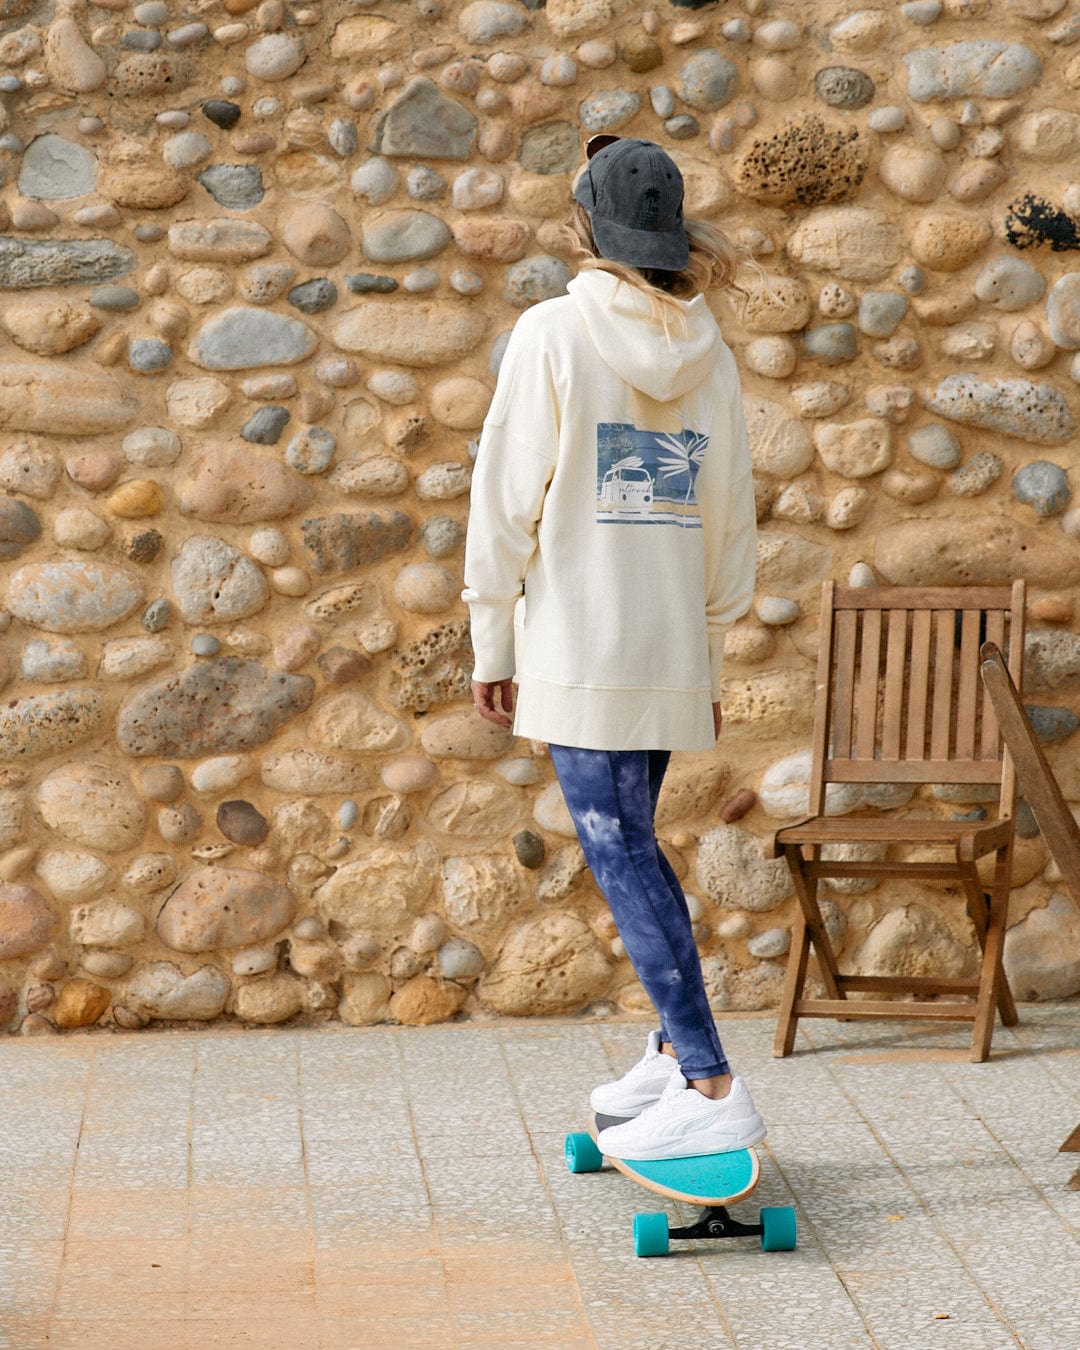 A person riding a skateboard near a stone wall and a wooden chair, with Saltrock Poster - Womens Pop Hoodie - Cream branding visible.